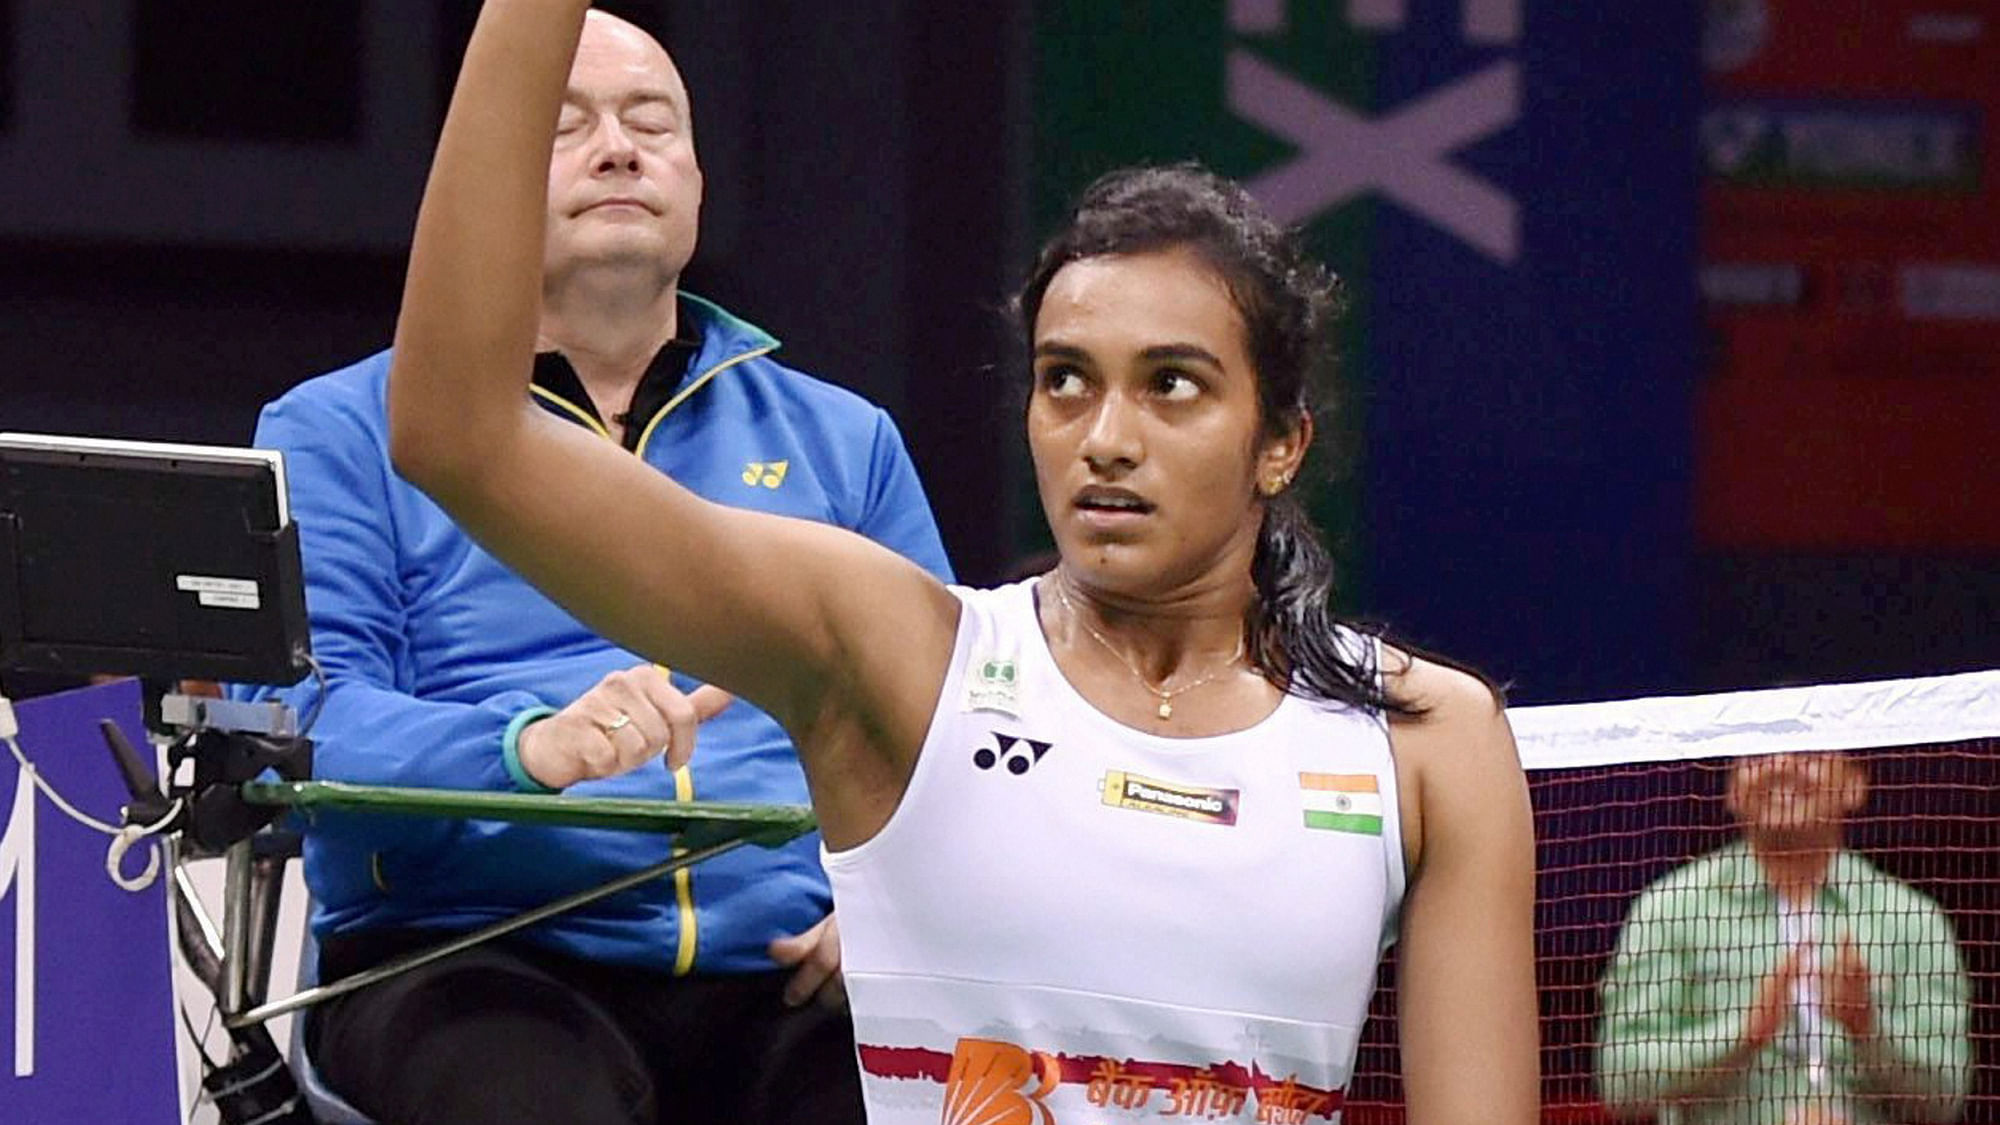 With total earnings of 5.5 million dollars, Sindhu is tied for the 13th place in The Highest-Paid Female Athletes 2019 list.